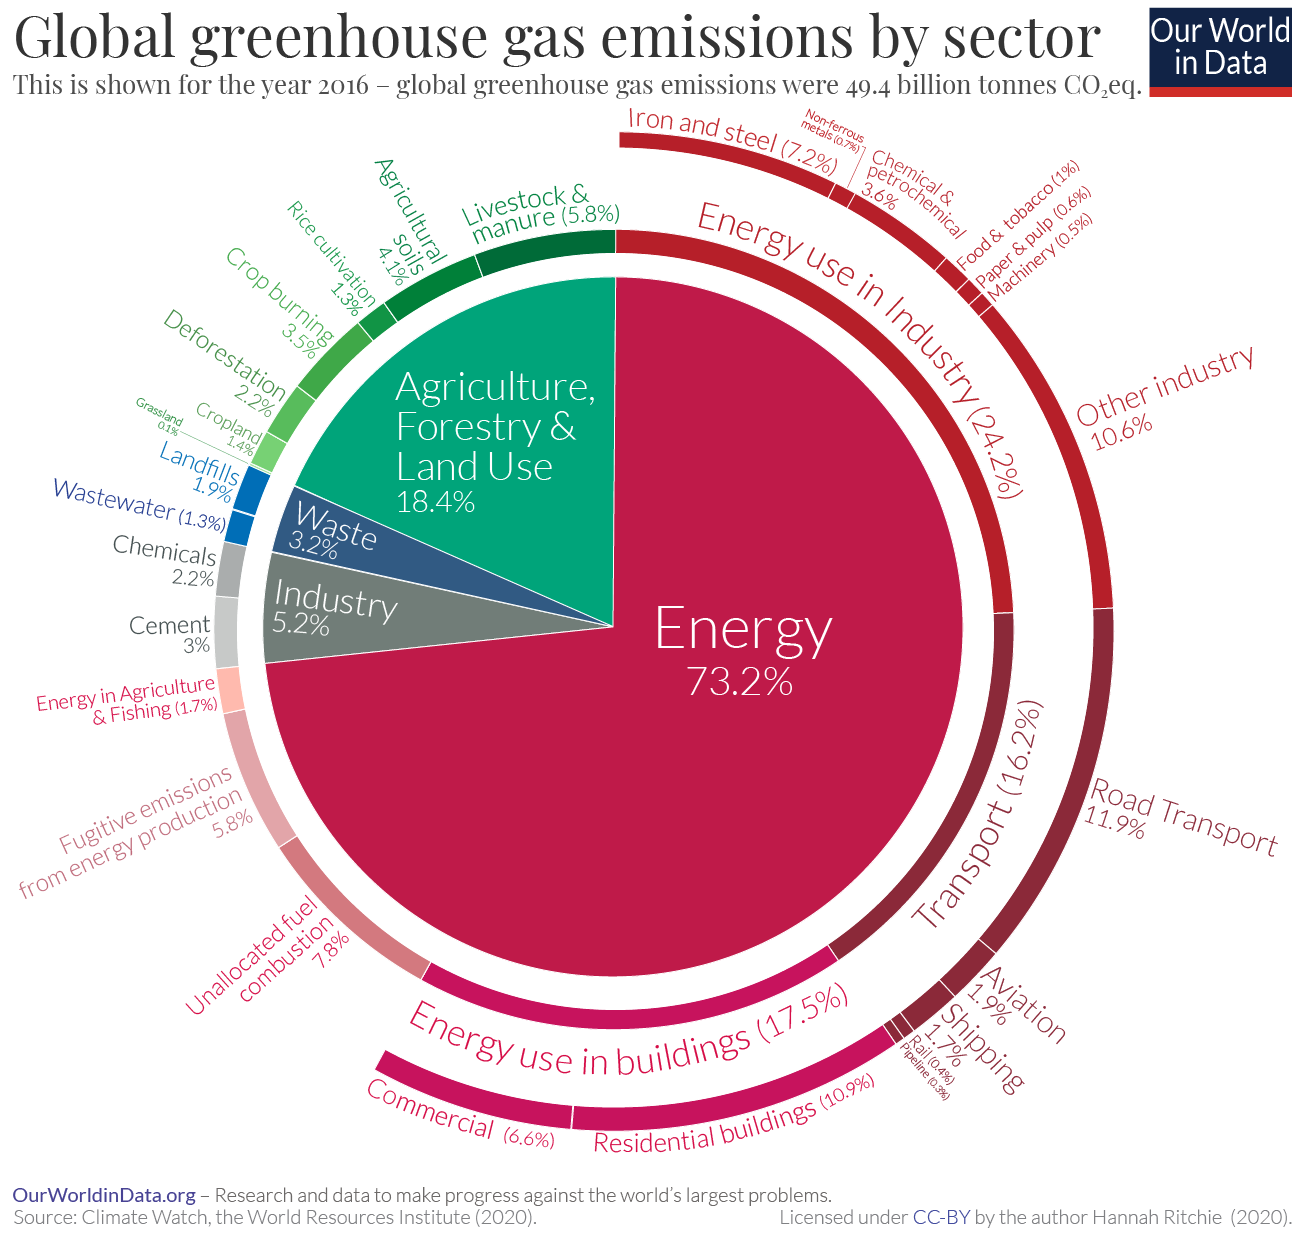 Emissions by sector - Our World in Data